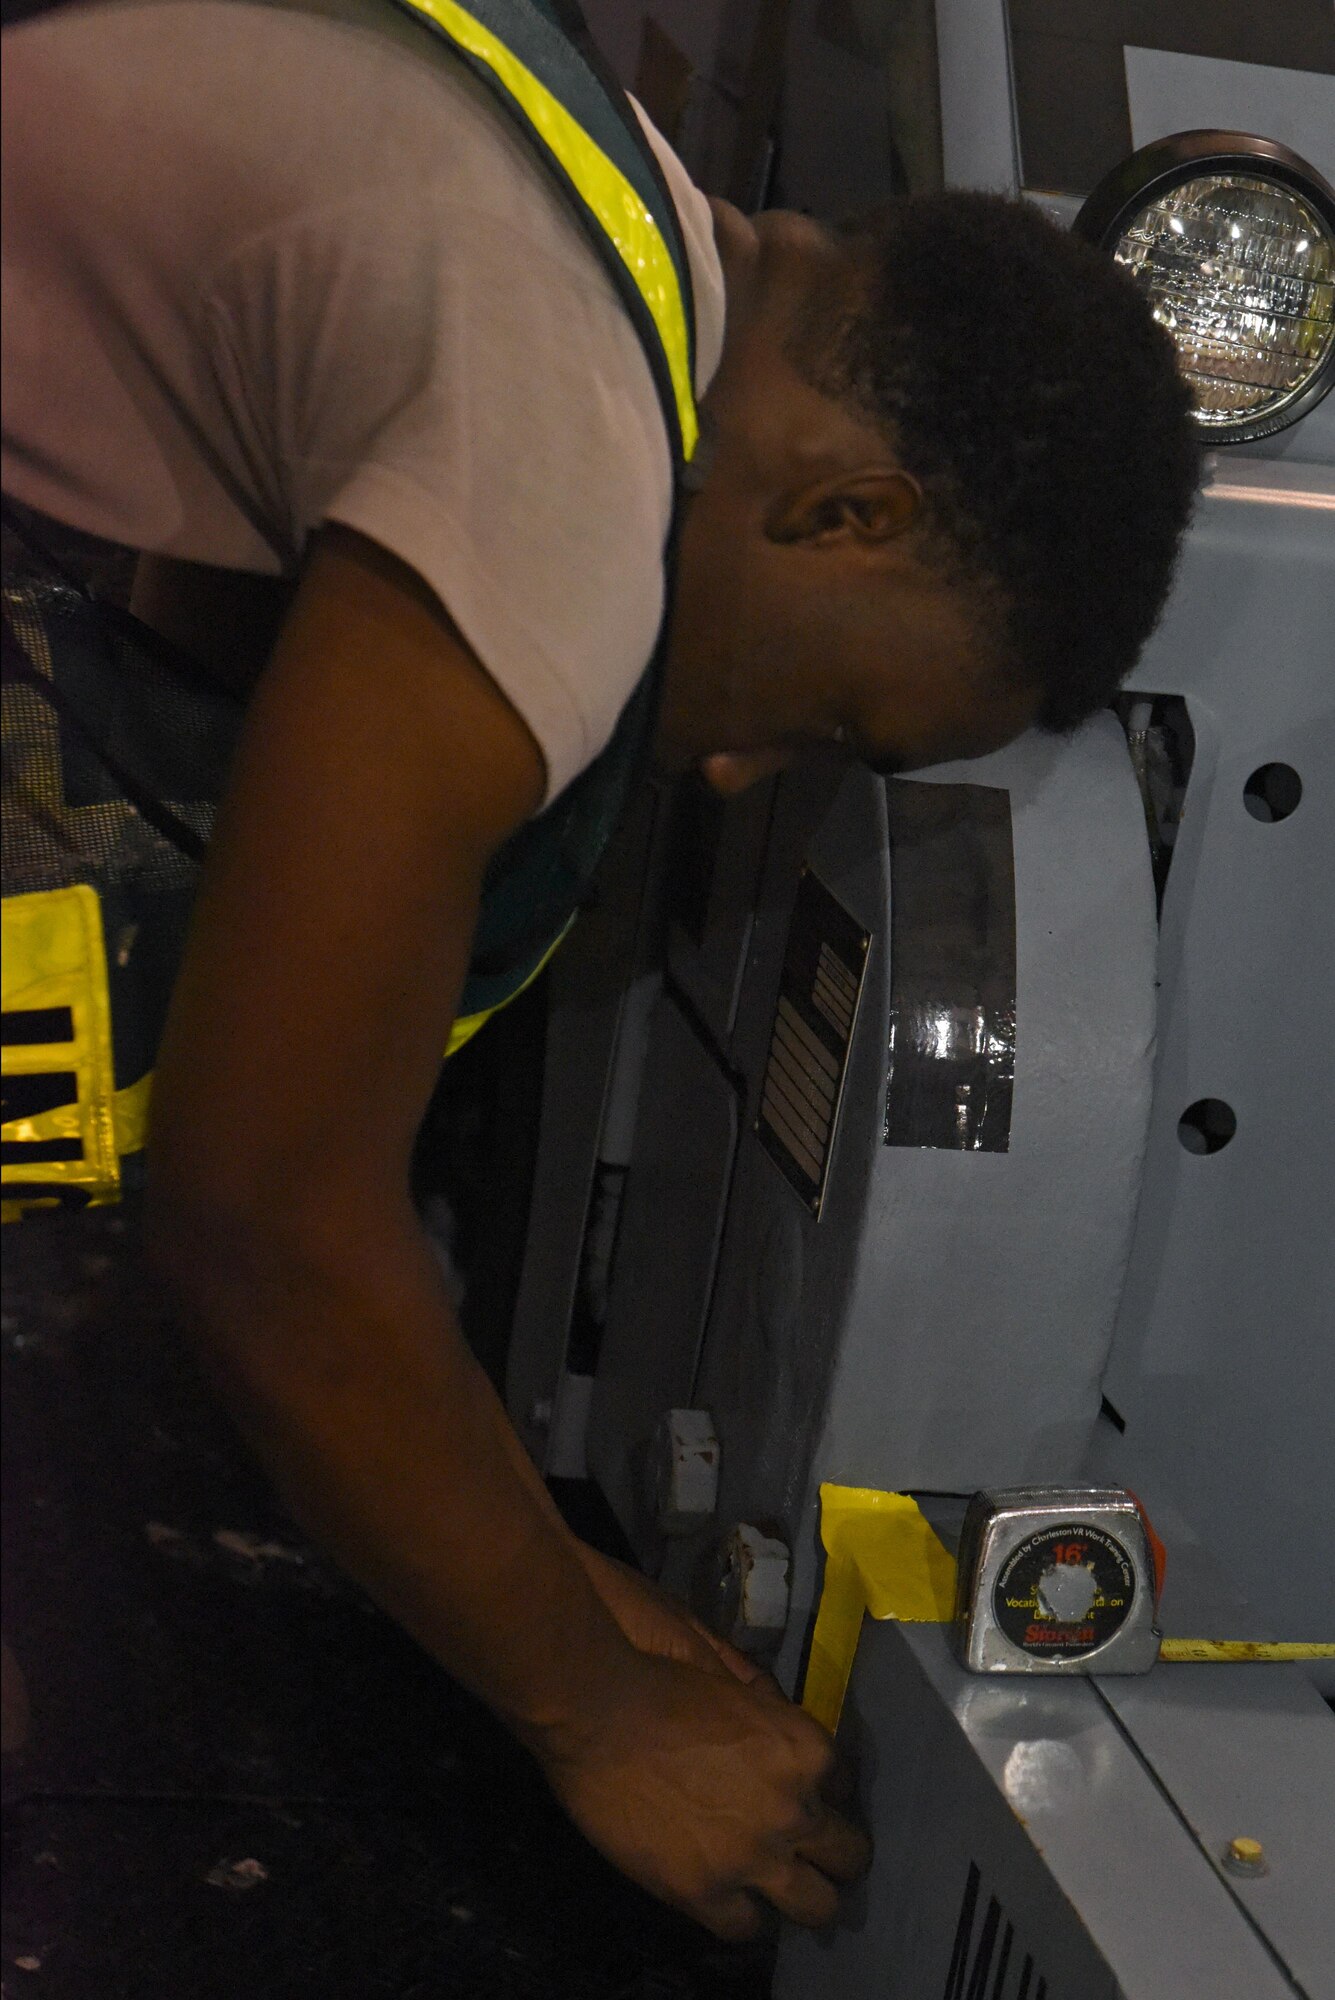 Airman Joshua Shepherd, 4th Logistics Readiness Squadron Travel Management Office receiving technician, places duct tape to mark the balance point on a piece of equipment during Exercise Thunderdome 17-02, July 20, 2017, at Seymour Johnson Air Force Base, North Carolina. Exercises such as this are performed to ensure mission readiness. (U.S. Air Force photo by Senior Airman Ashley Maldonado)